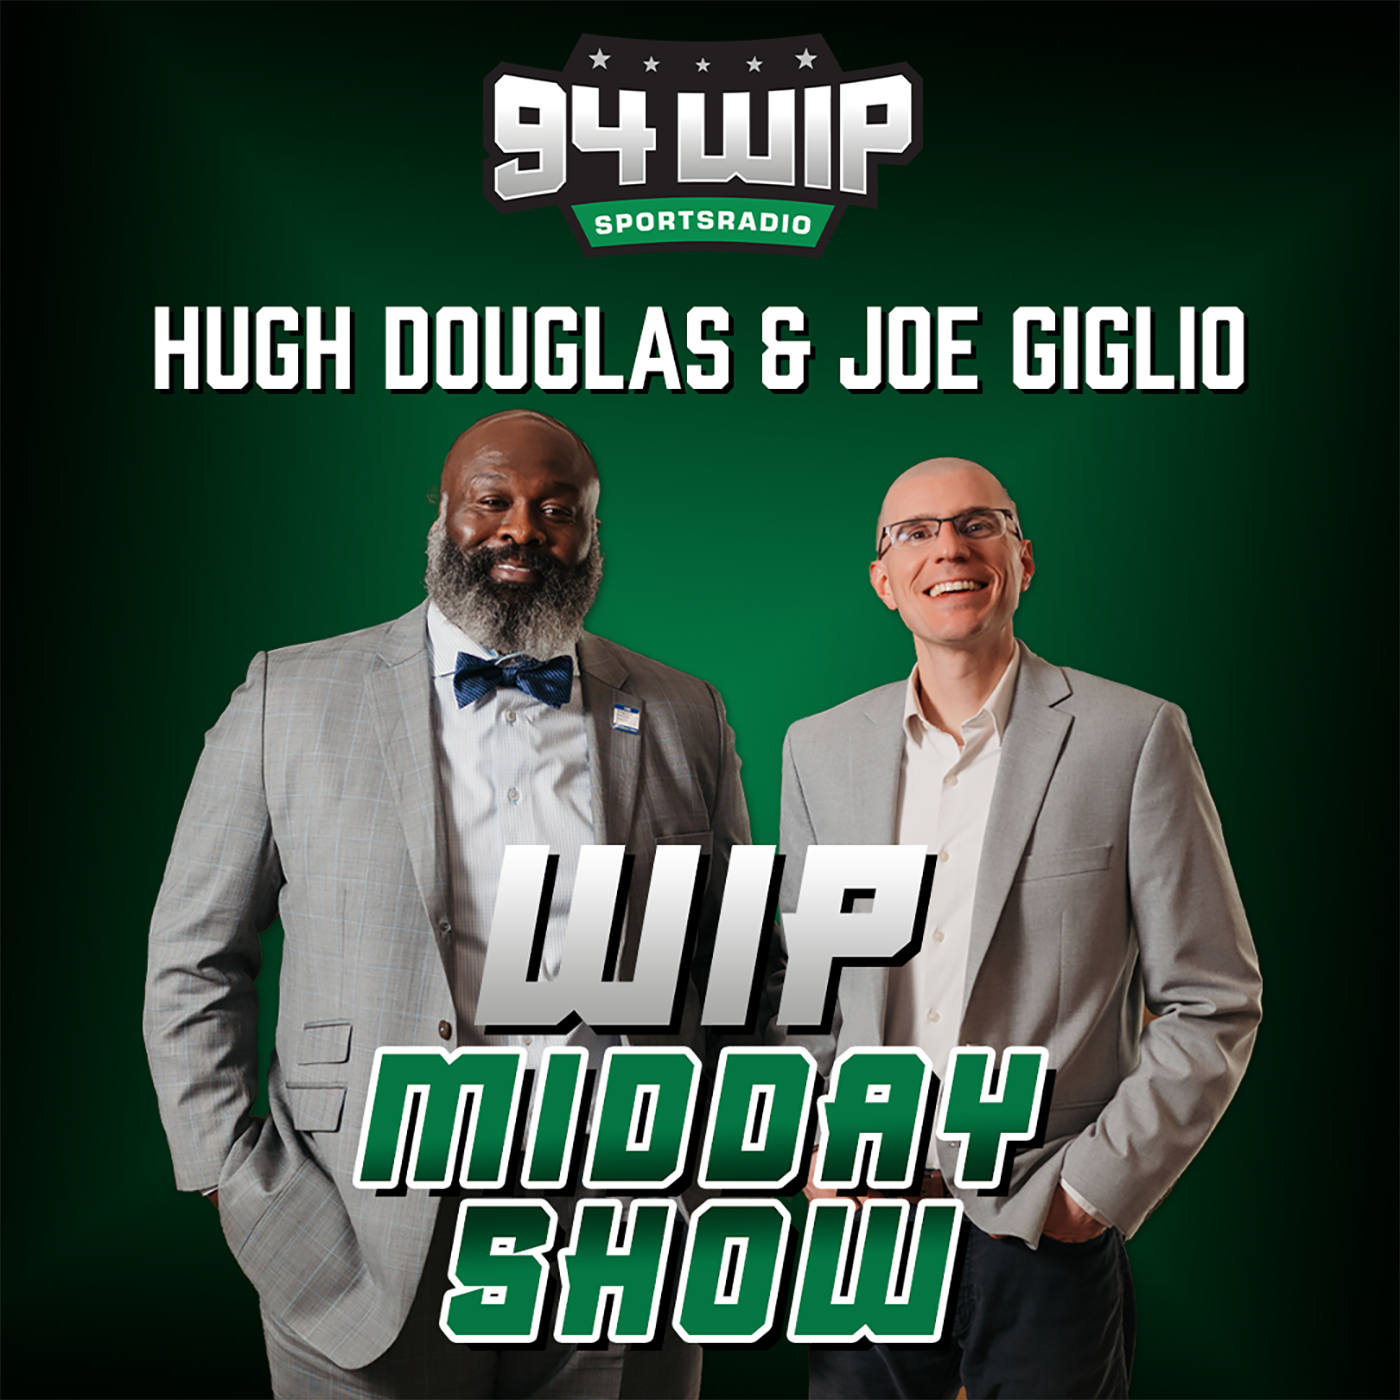 Full Show: Delaware Valley Duds: Eagles Edition